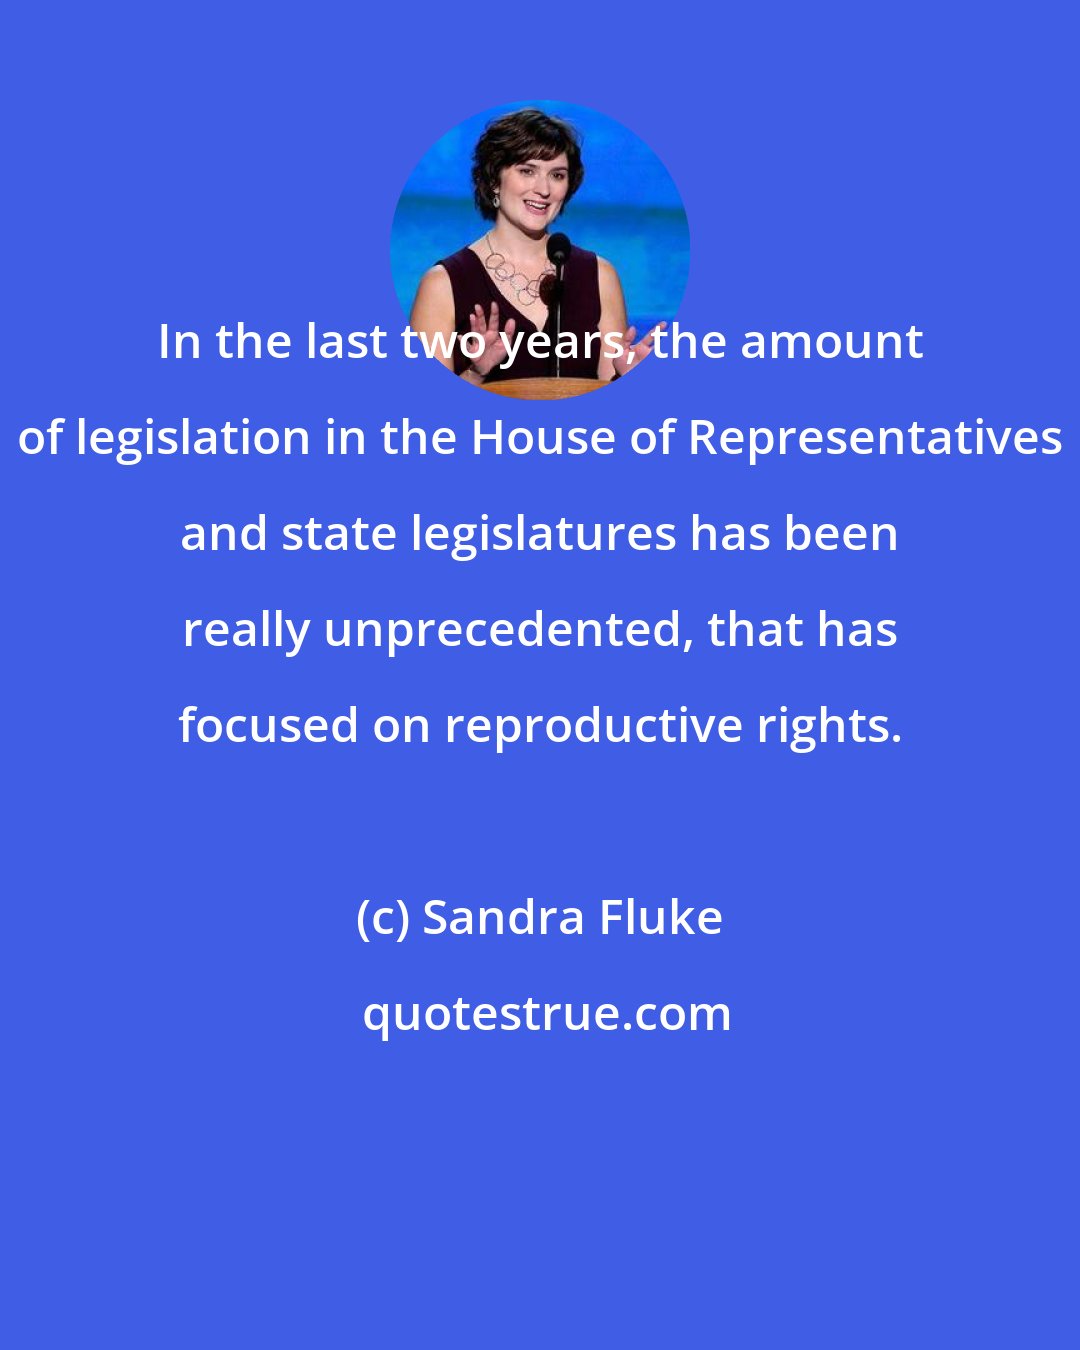 Sandra Fluke: In the last two years, the amount of legislation in the House of Representatives and state legislatures has been really unprecedented, that has focused on reproductive rights.